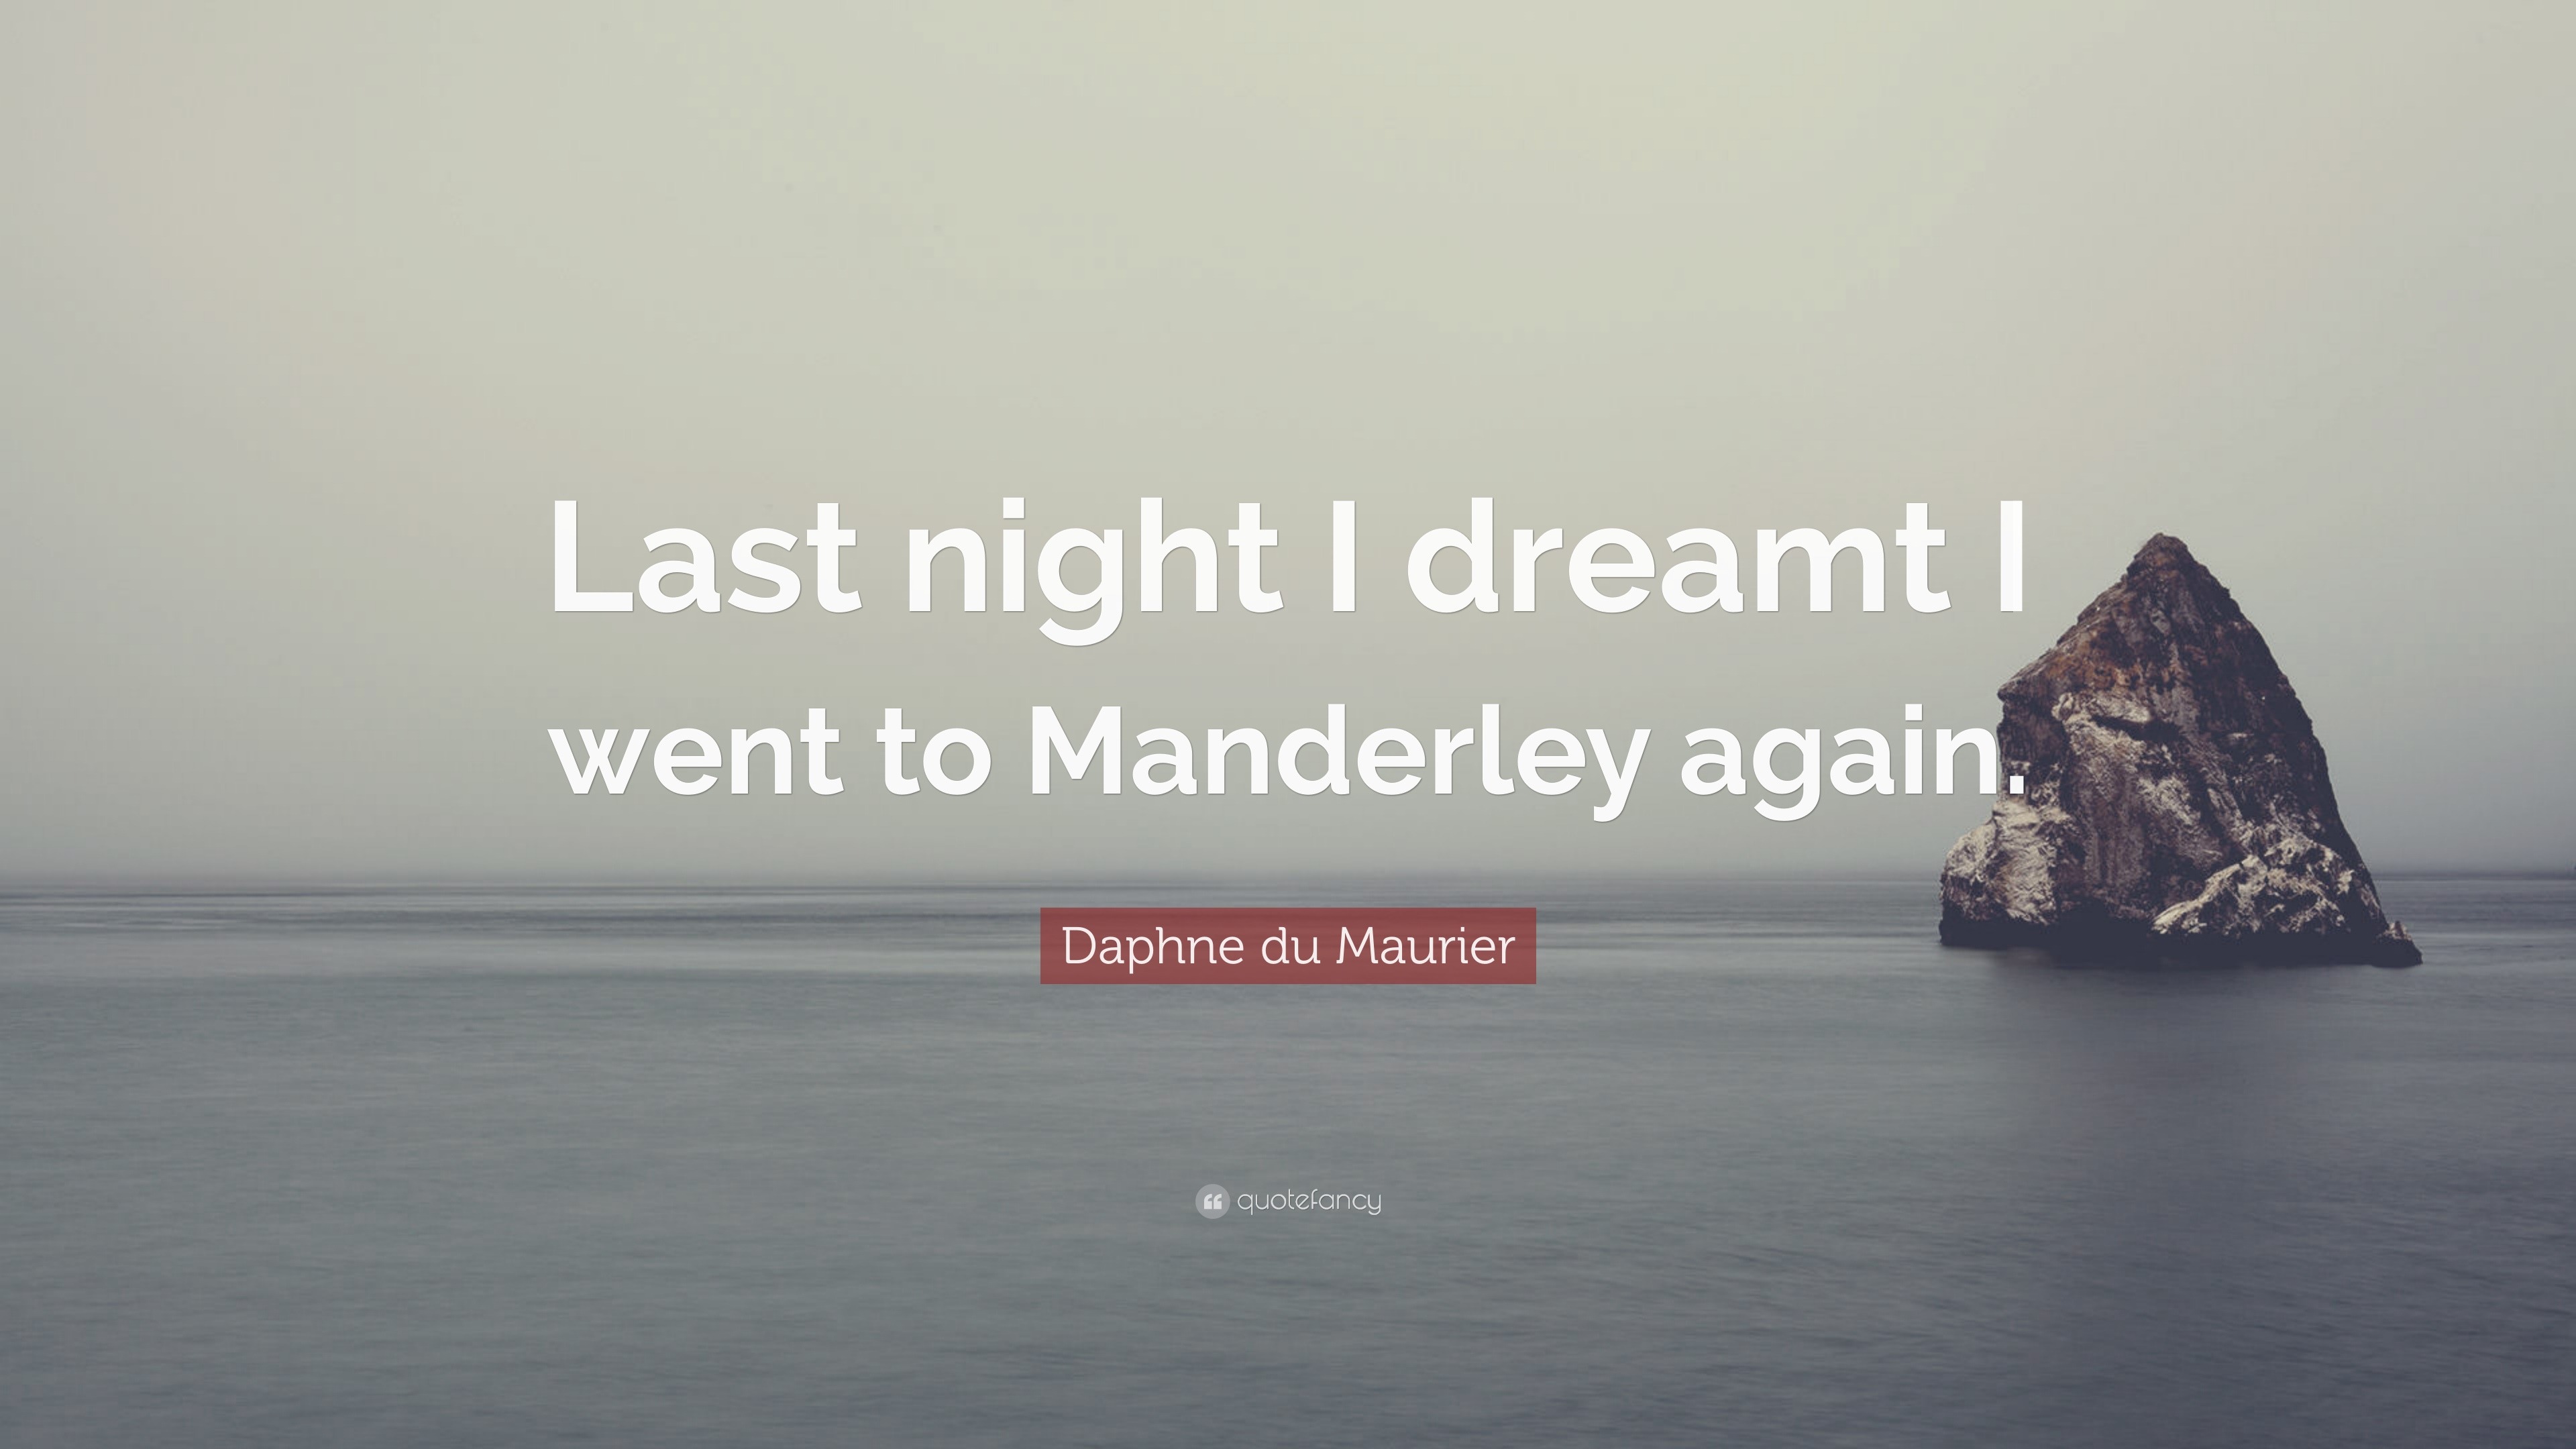 Daphne du Maurier Quote: “Last night I dreamt I went to Manderley again